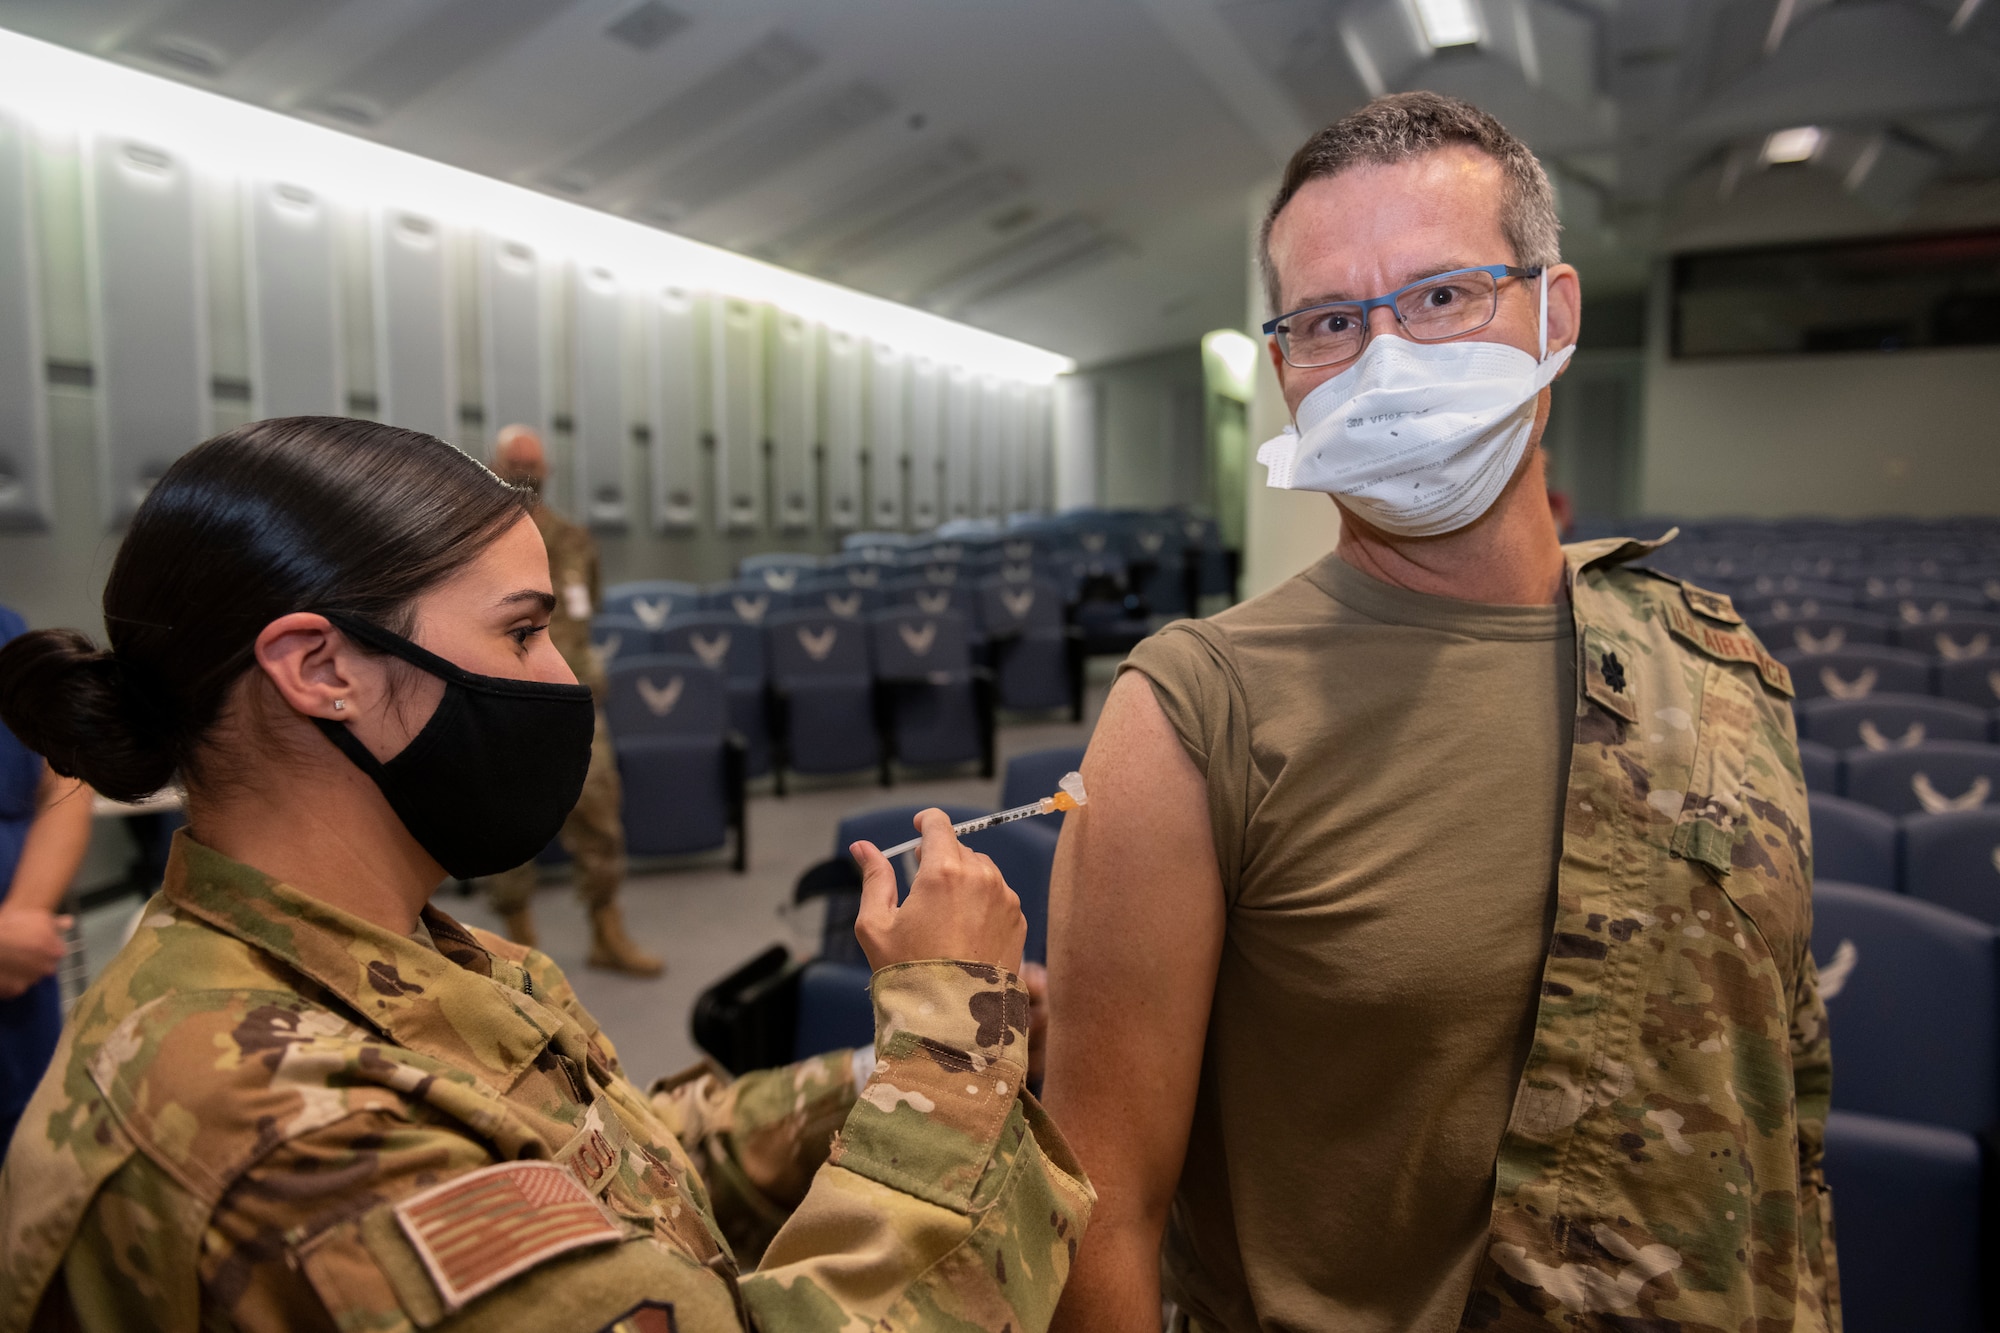 U.S. Air Force Tech. Sgt. Yadira Wood, 60th Aeromedical Evacuation Squadron aerospace medical technician, administers the COVID-19 vaccine to Lt. Col. Joseph Sky, 60th Surgical Squadron chief of medical staff, Dec. 22, 2020, at Travis Air Force Base, California. Sky was the first person to receive the vaccine at Travis AFB. Sky will join several Airmen from the 60th Medical Group on a deployment to Southern California to assist with pandemic relief efforts. David Grant U.S. Air Force Medical Center is the largest Air Force medical facility and provides care to more than 276,000 Department of Defense and Veteran Affairs eligible beneficiaries. Essential medical personnel from the 60th Medical Group were the first to receive the vaccine at Travis AFB. (U.S. Air Force photo by Senior Airman Cameron Otte)